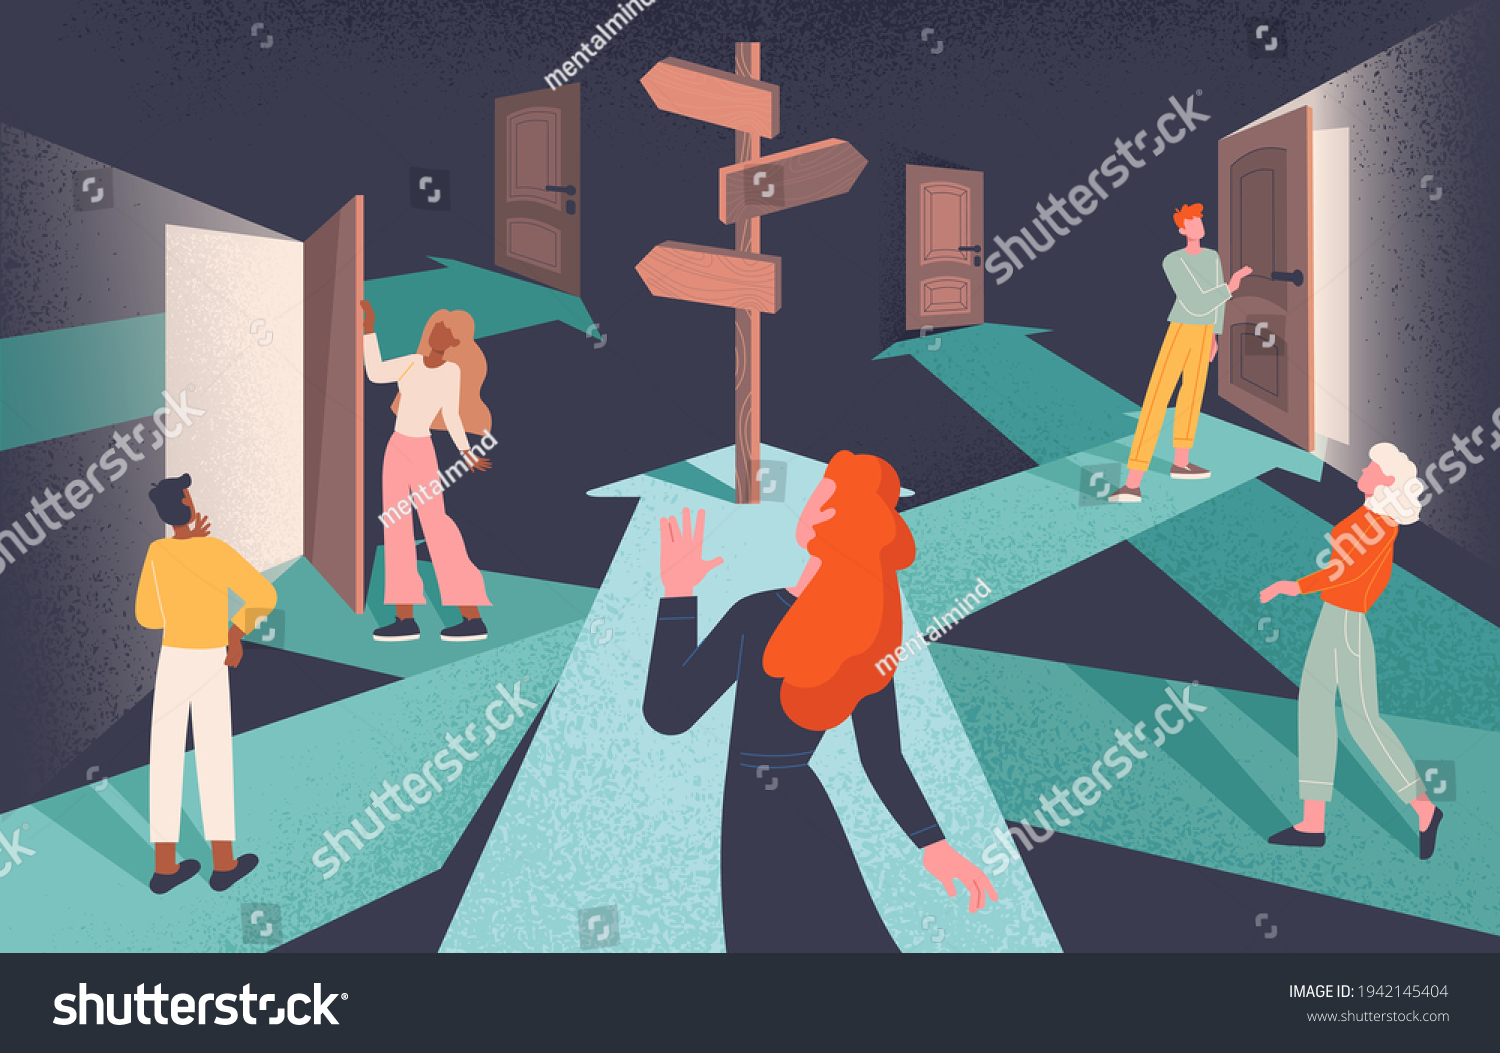 SVG of Psychological concept of choices and Finding or Choosing the right life path with group of diverse people following intersecting paths to doors with central signpost on arrow, flat vector illustration svg